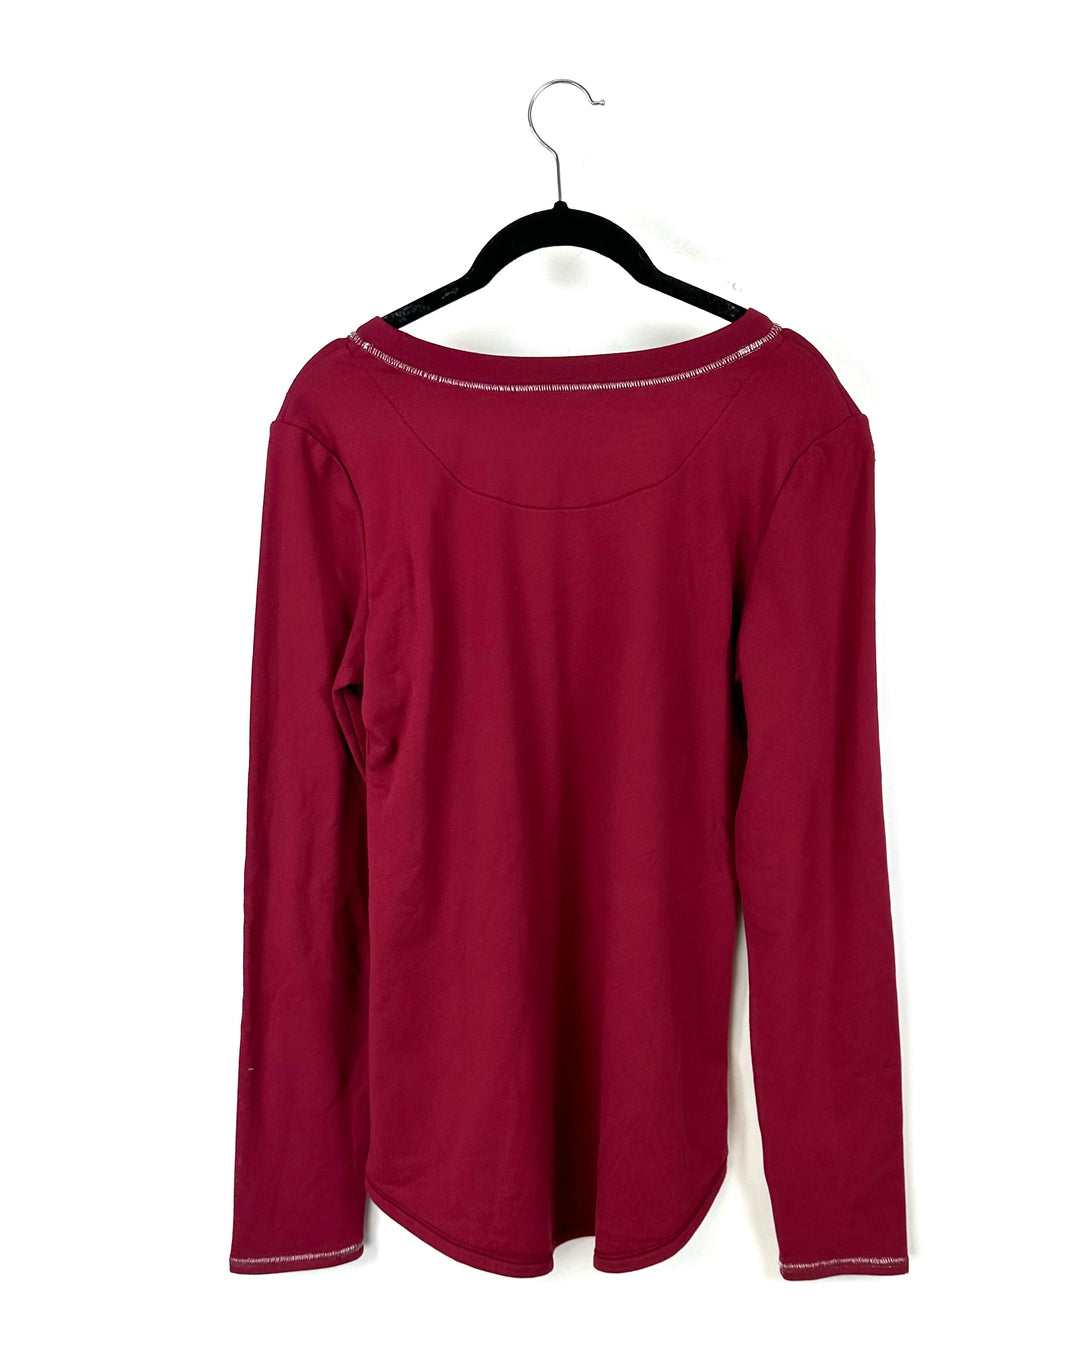 Red Long Sleeve Soft Top - Small